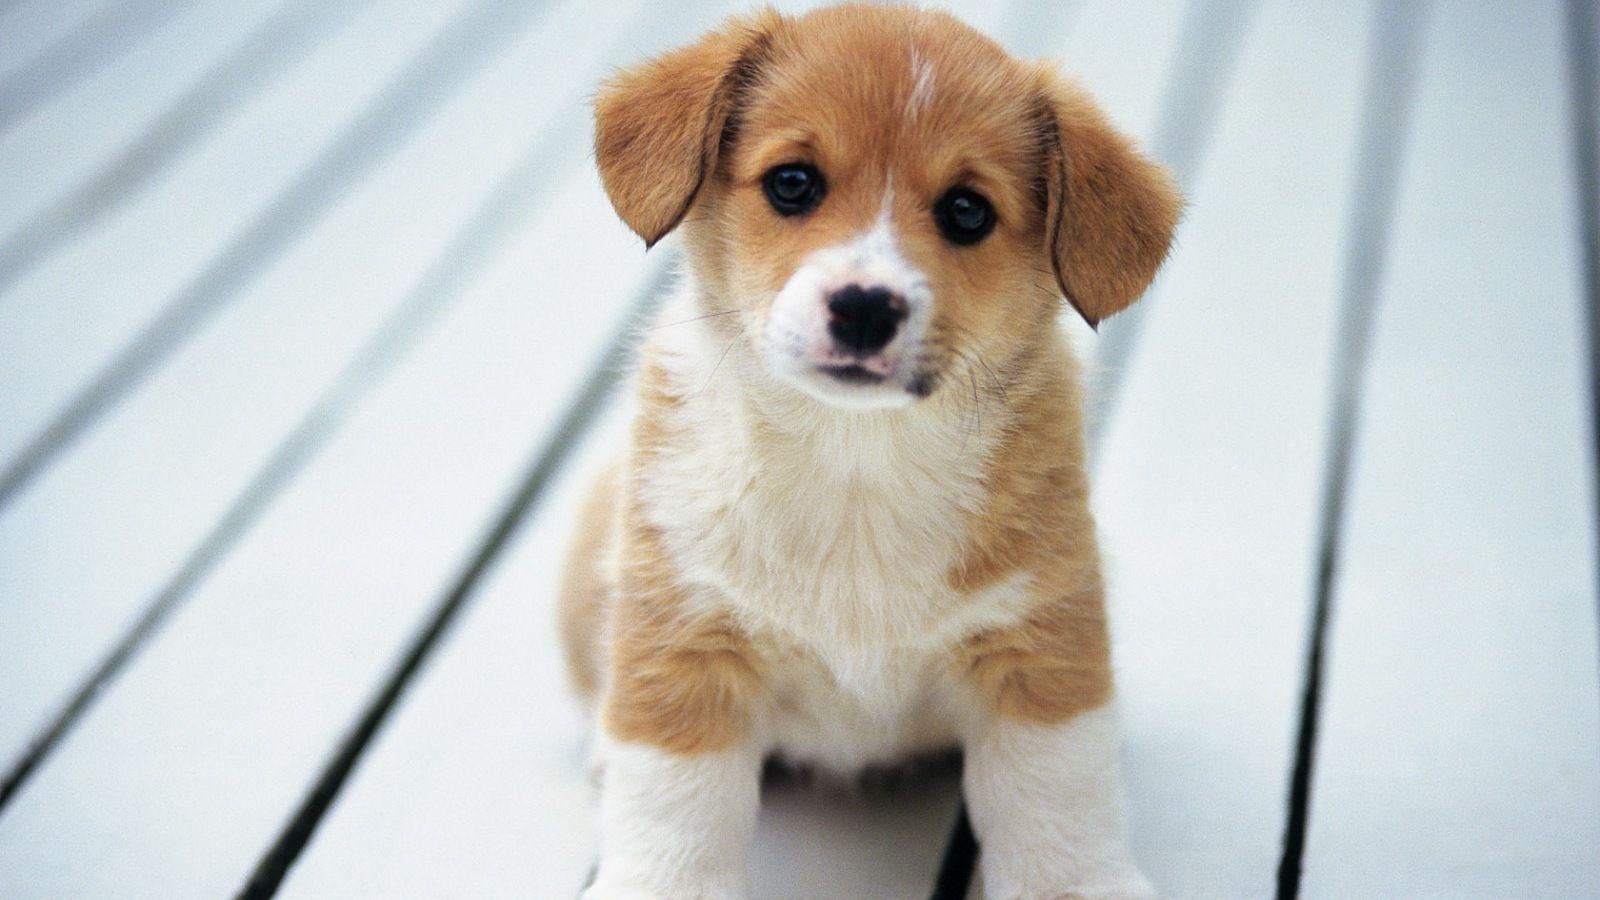 animal wallpaper for home screen. Animal Cute Little Puppy